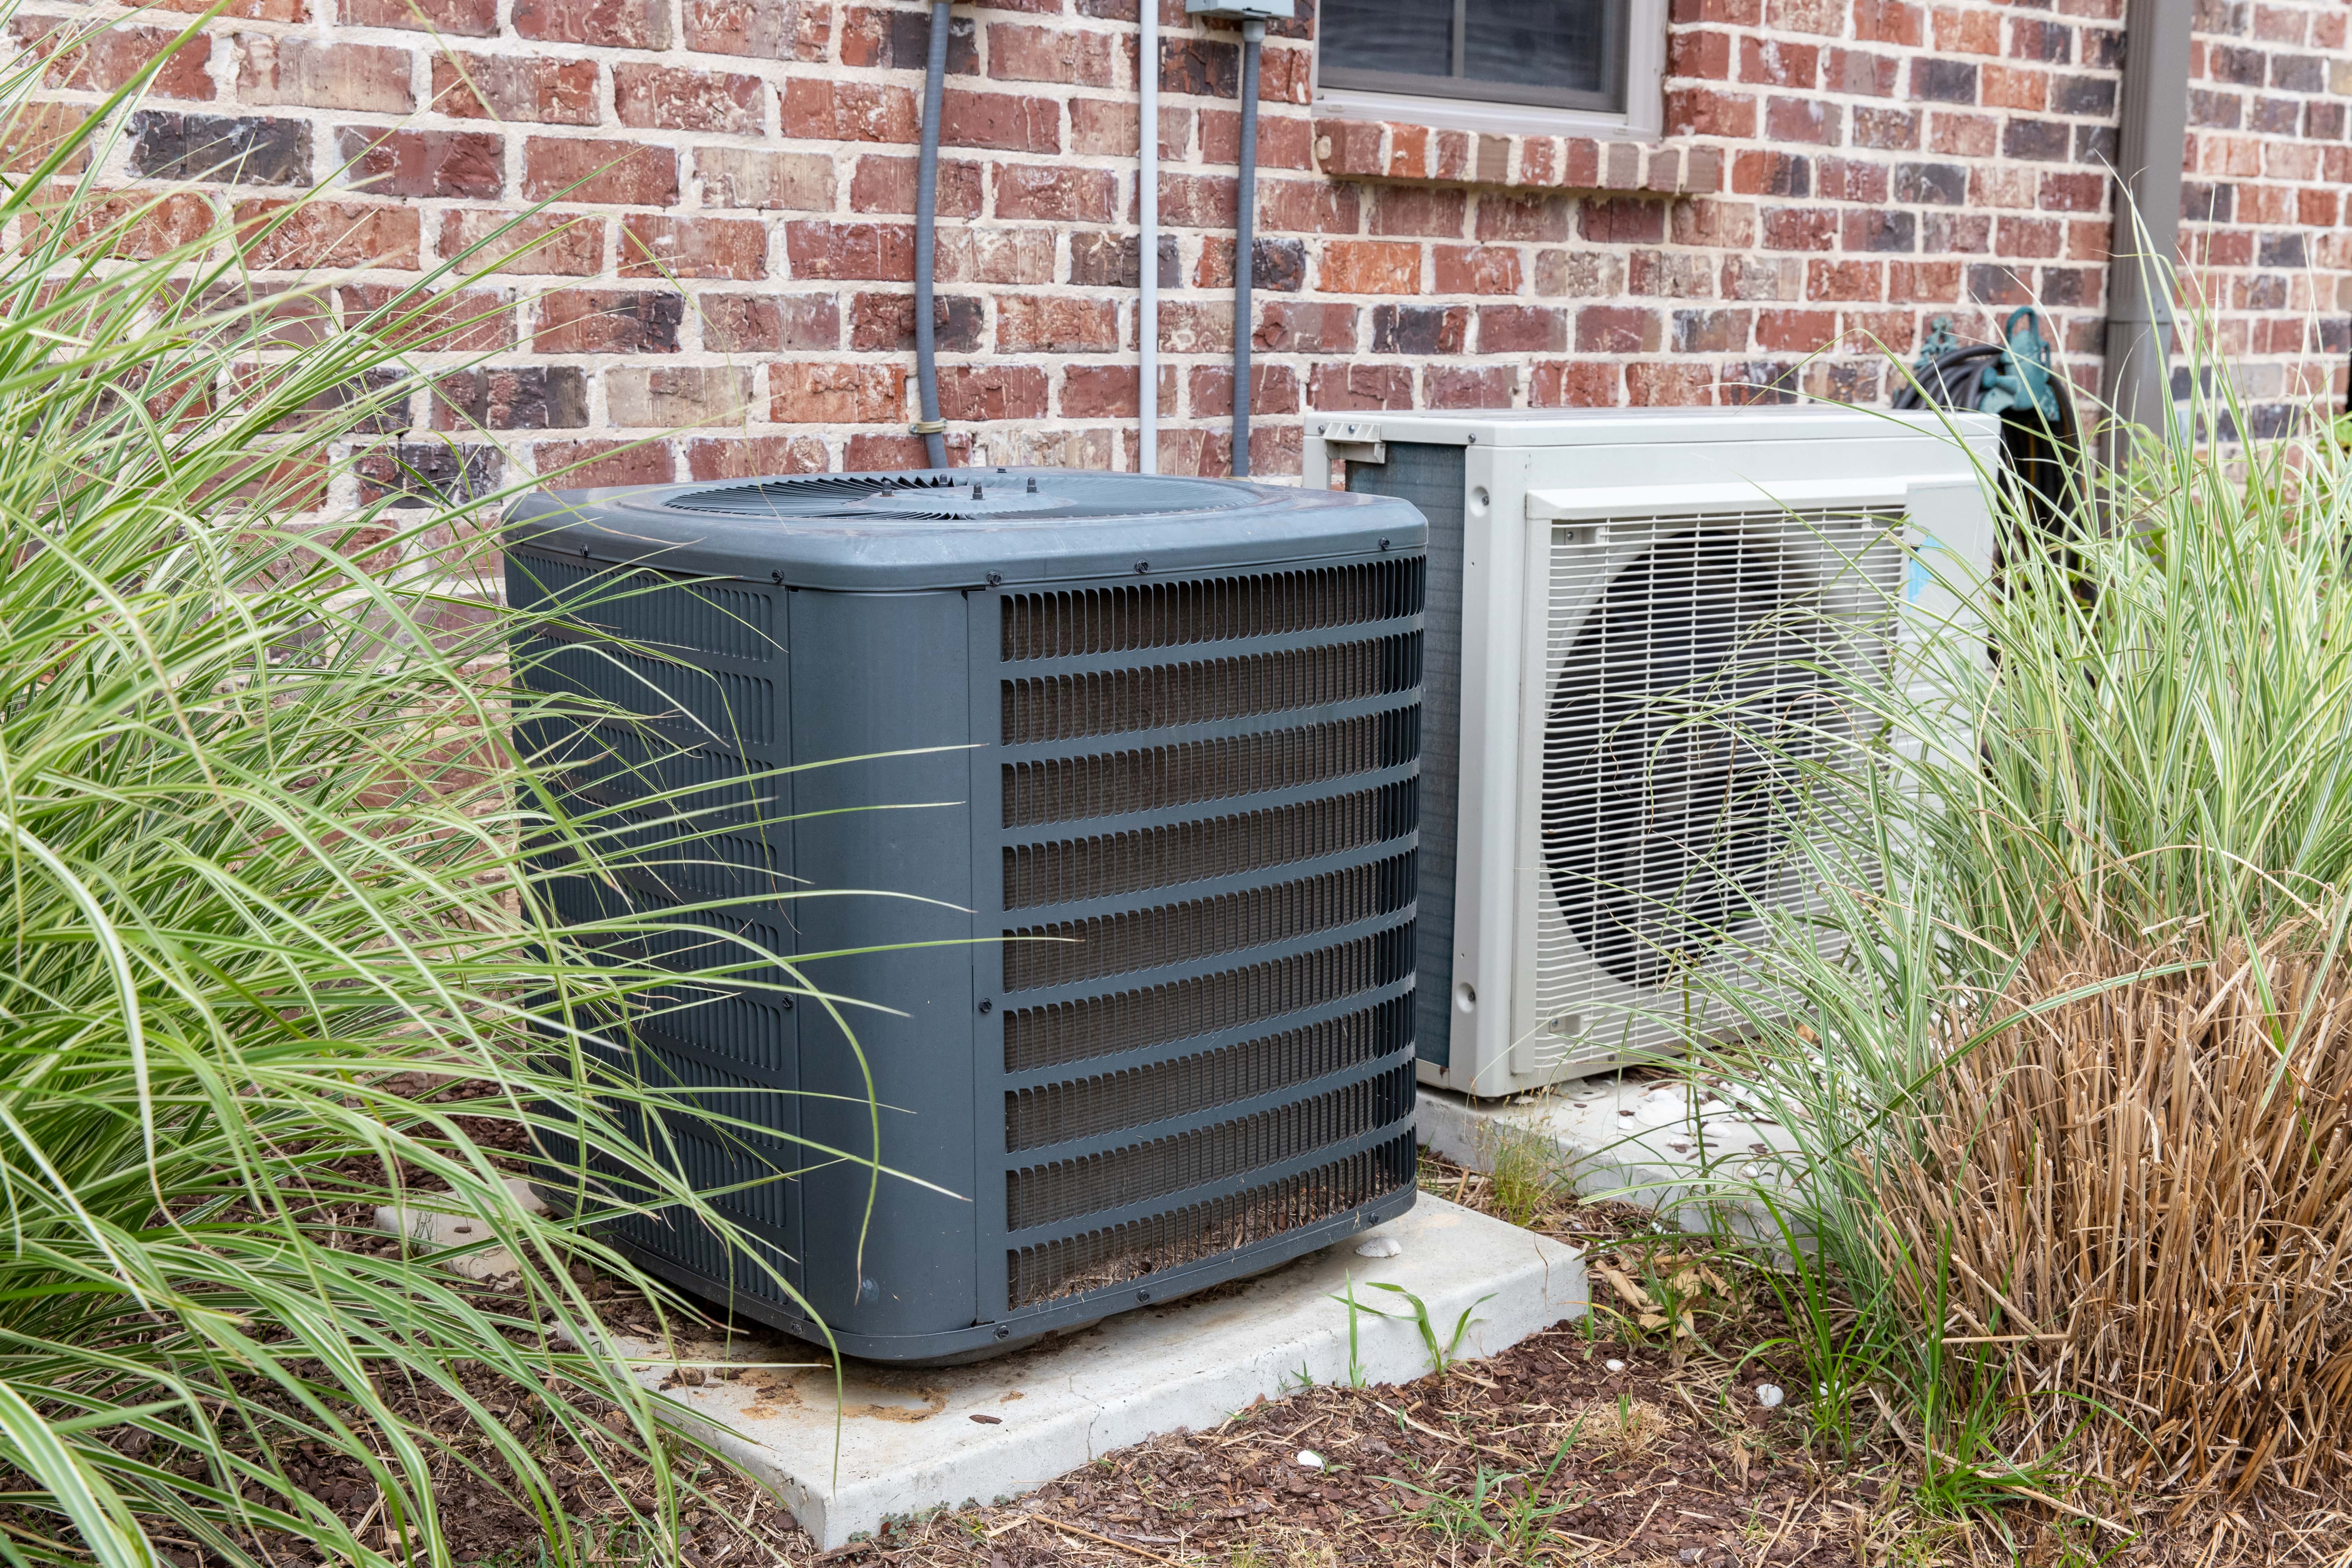  How Often Should I Have My Hvac System Serviced? Tips and Tricks thumbnail